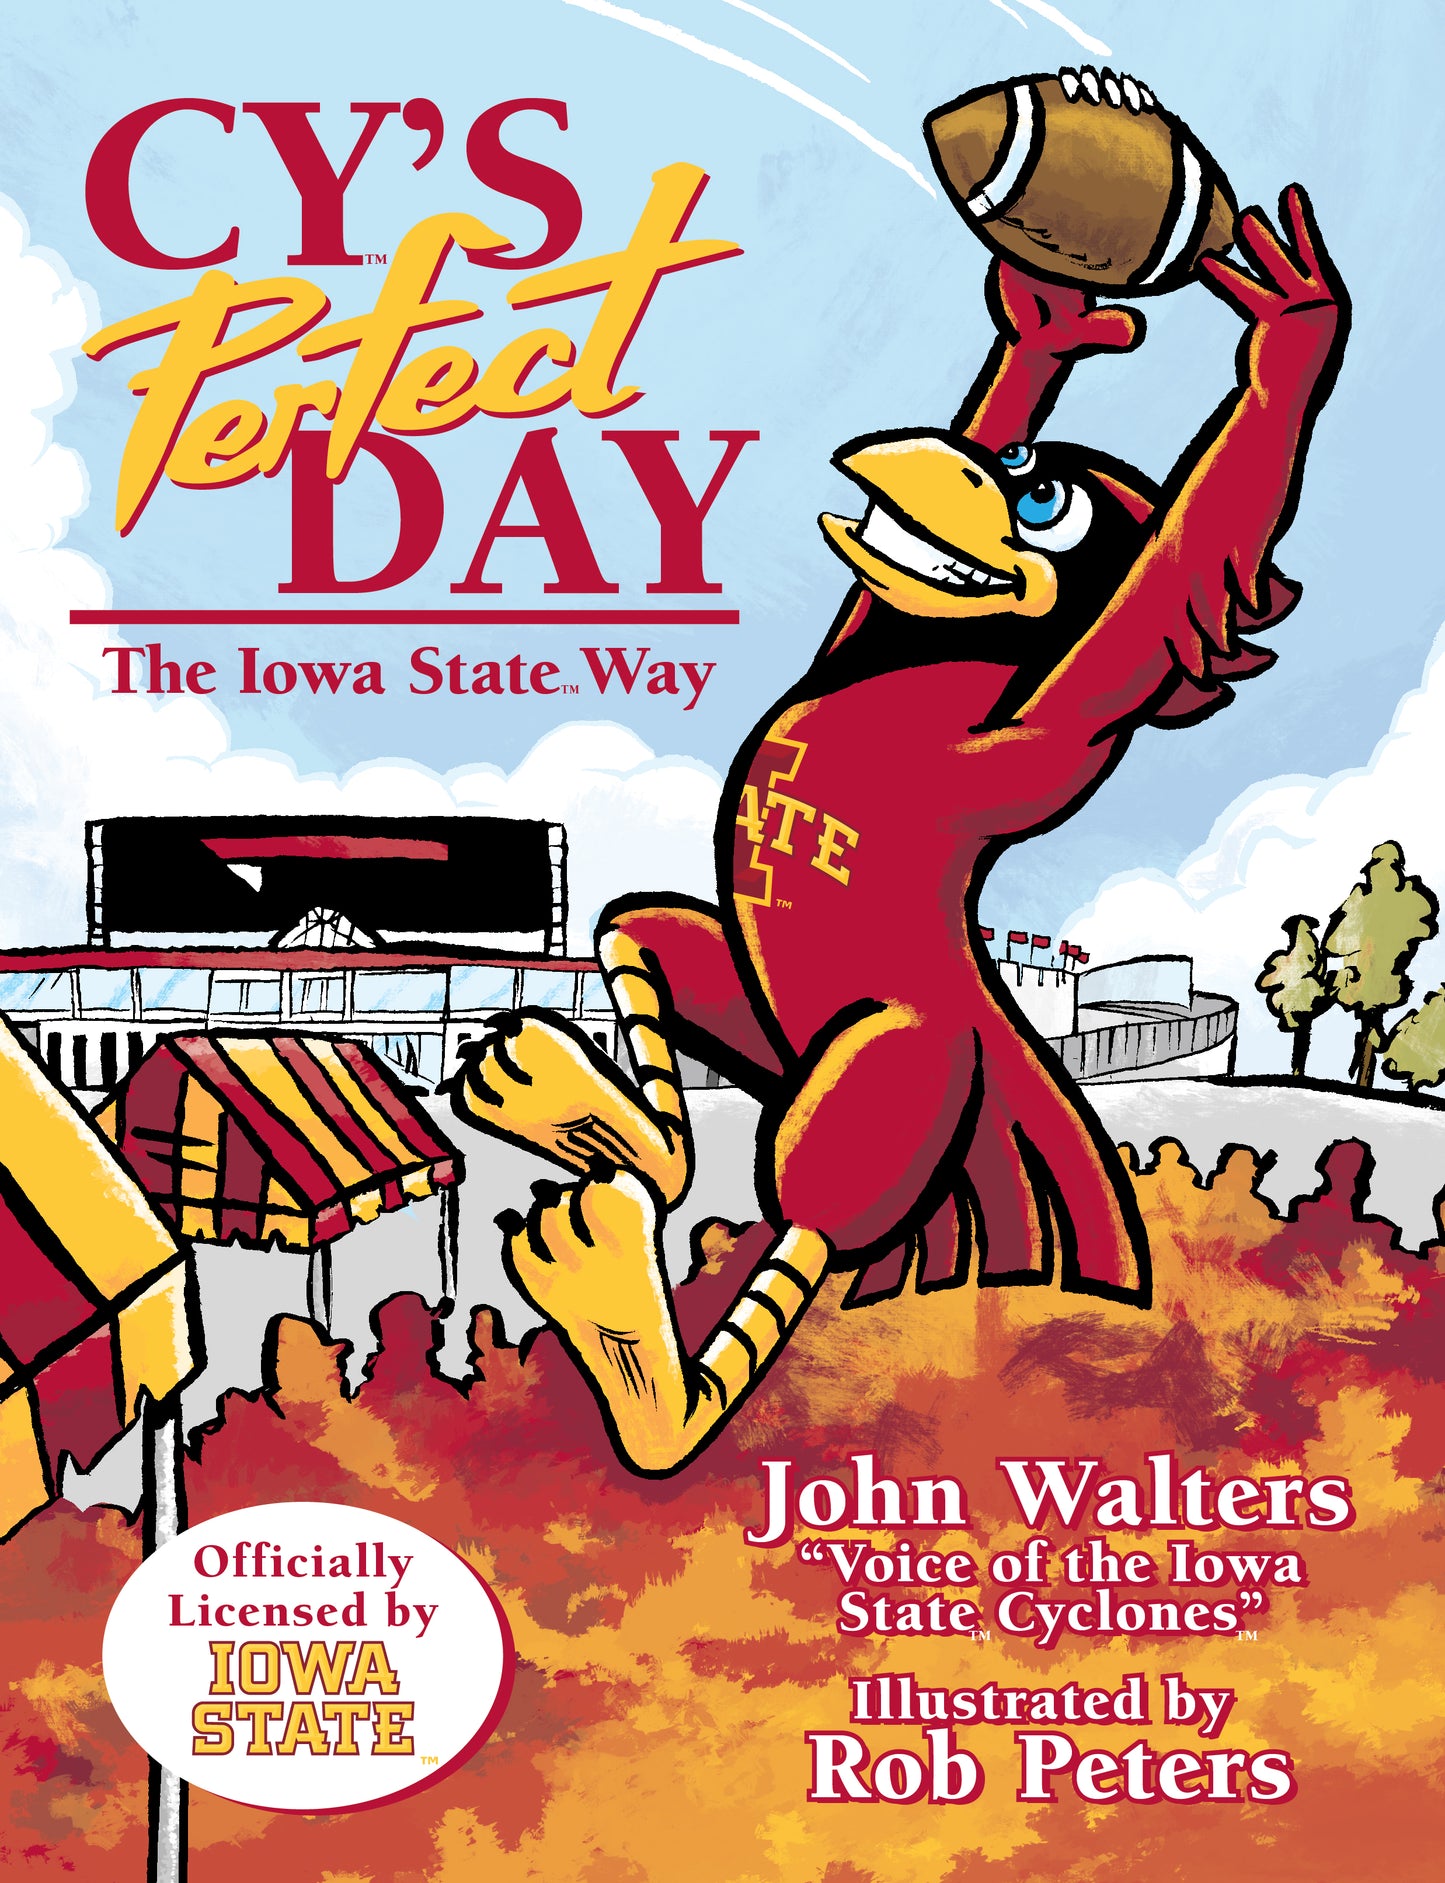 Cy's Perfect Day - The Iowa State Way